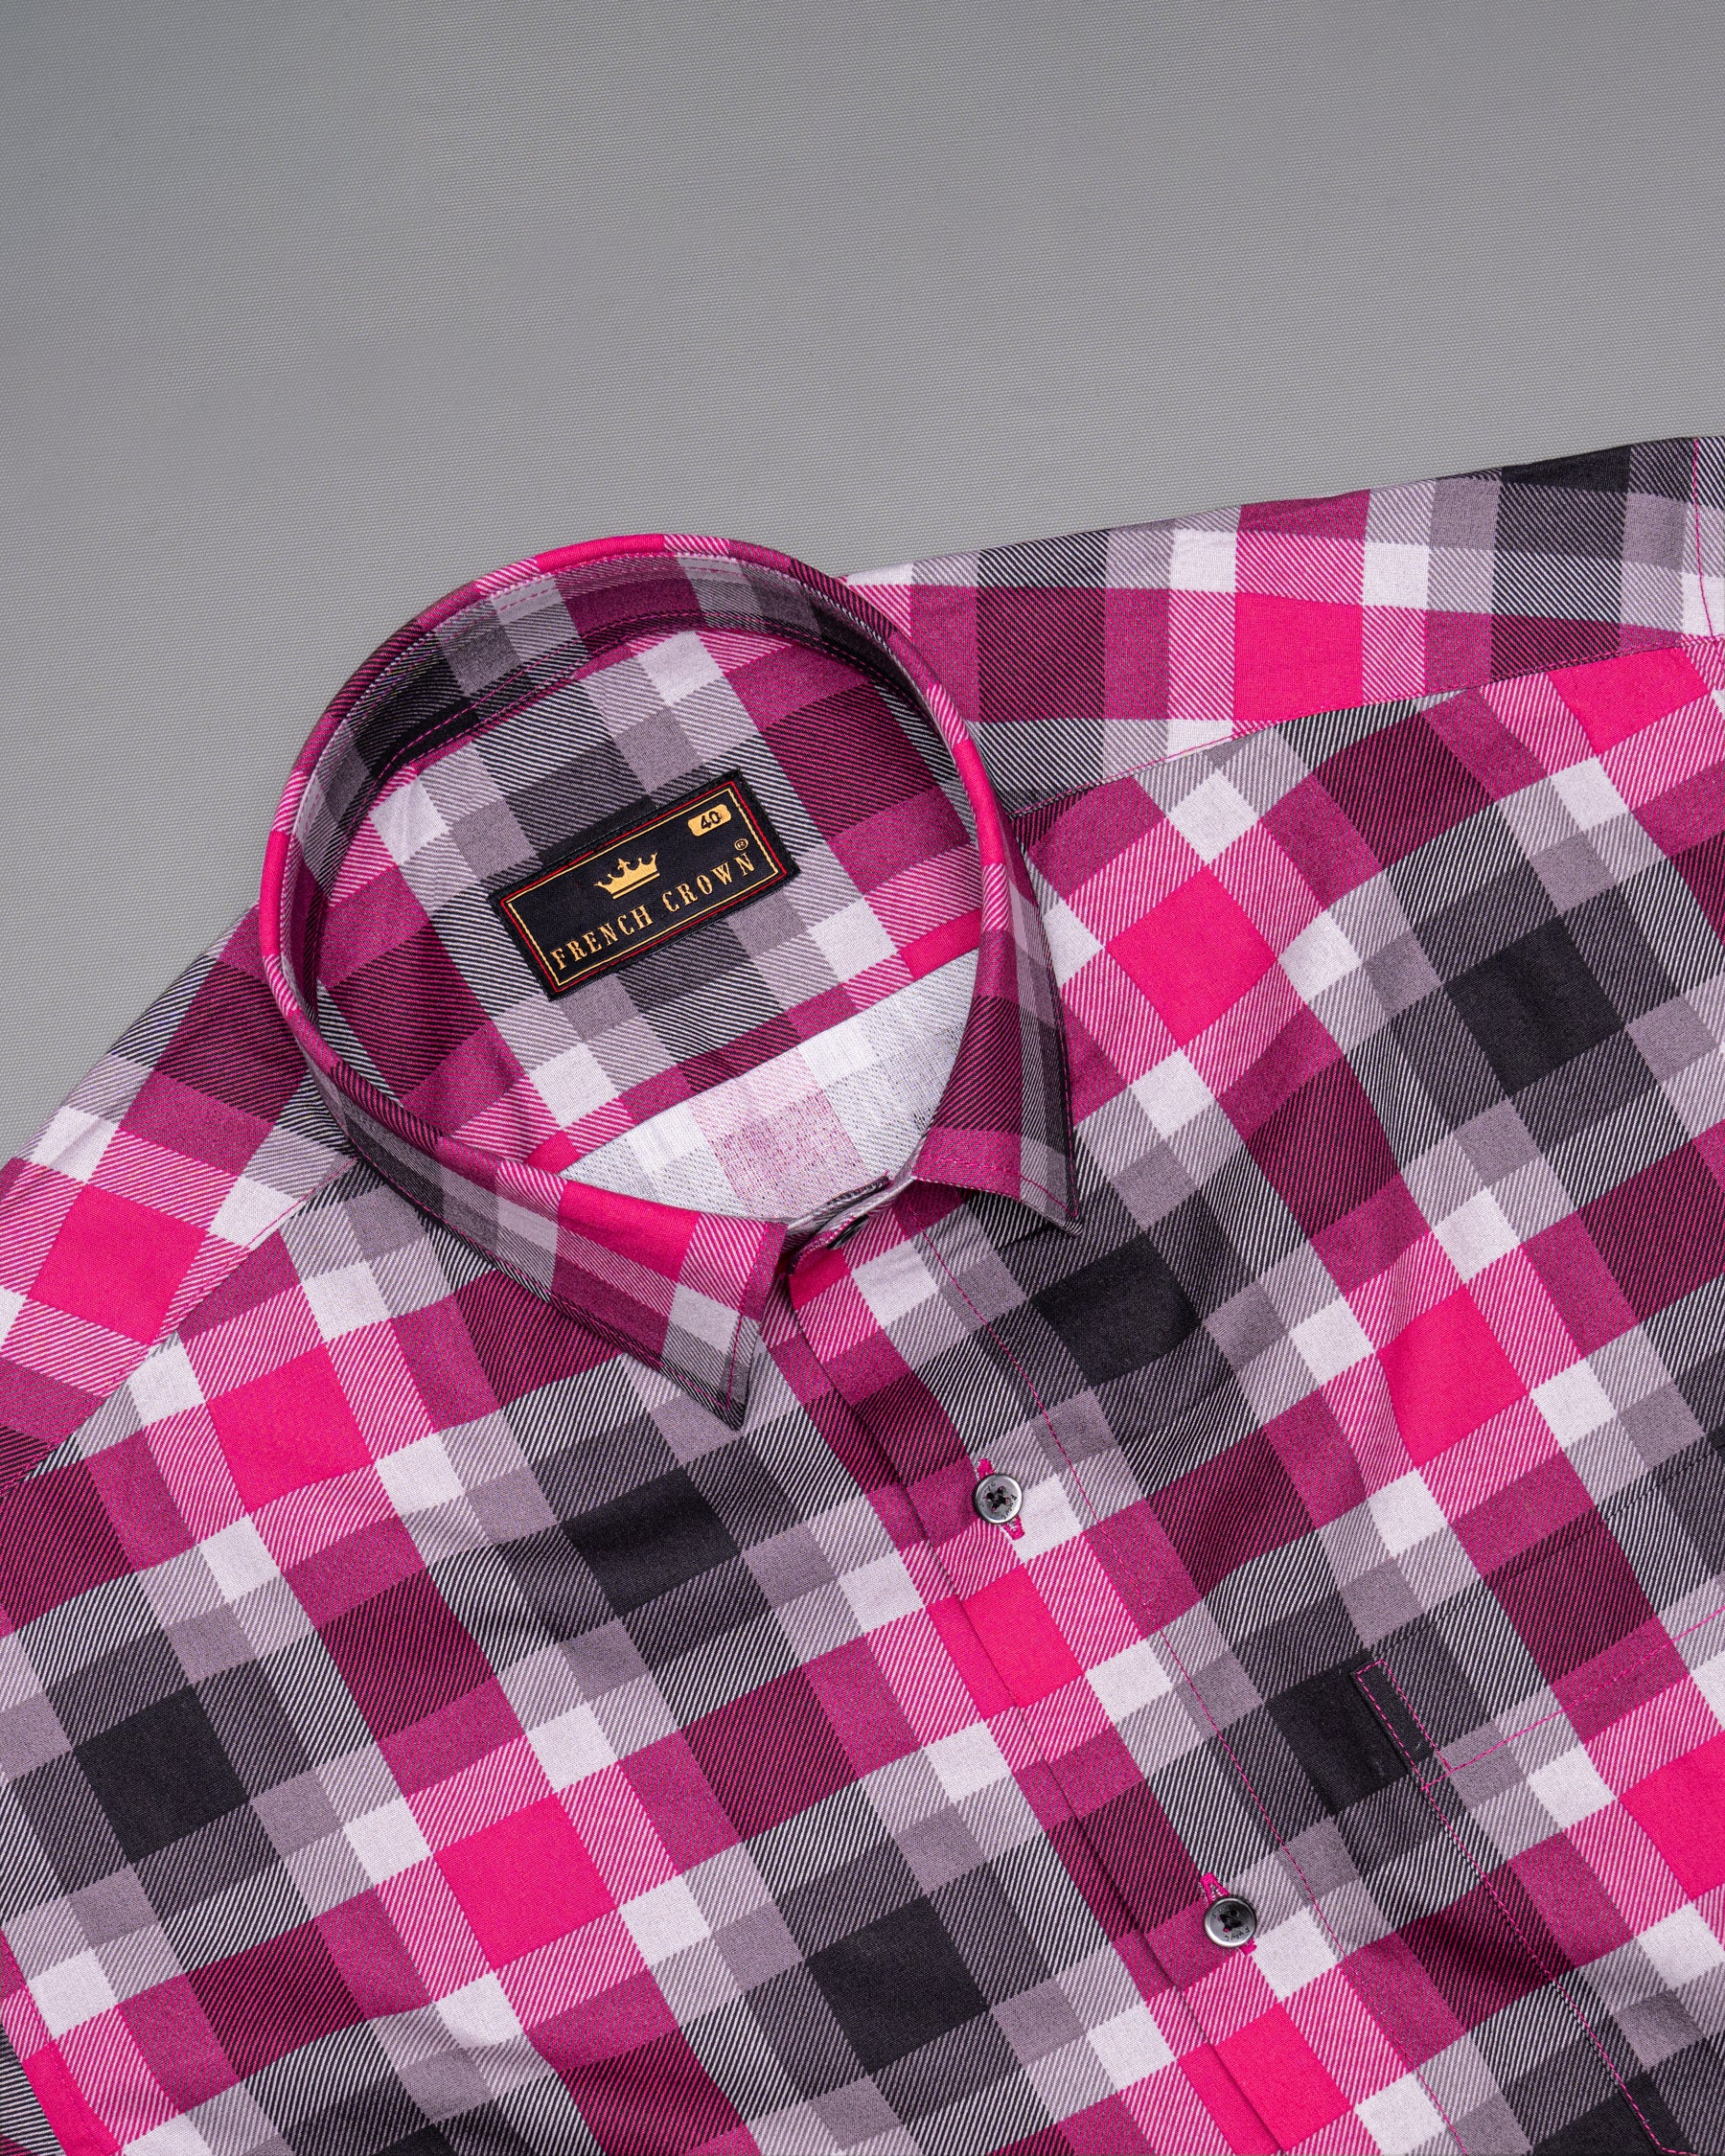 Ruby Pink with Jade Black and White Plaid Royal Oxford Shirt 5090-BLK-38, 5090-BLK-H-38, 5090-BLK-39, 5090-BLK-H-39, 5090-BLK-40, 5090-BLK-H-40, 5090-BLK-42, 5090-BLK-H-42, 5090-BLK-44, 5090-BLK-H-44, 5090-BLK-46, 5090-BLK-H-46, 5090-BLK-48, 5090-BLK-H-48, 5090-BLK-50, 5090-BLK-H-50, 5090-BLK-52, 5090-BLK-H-52